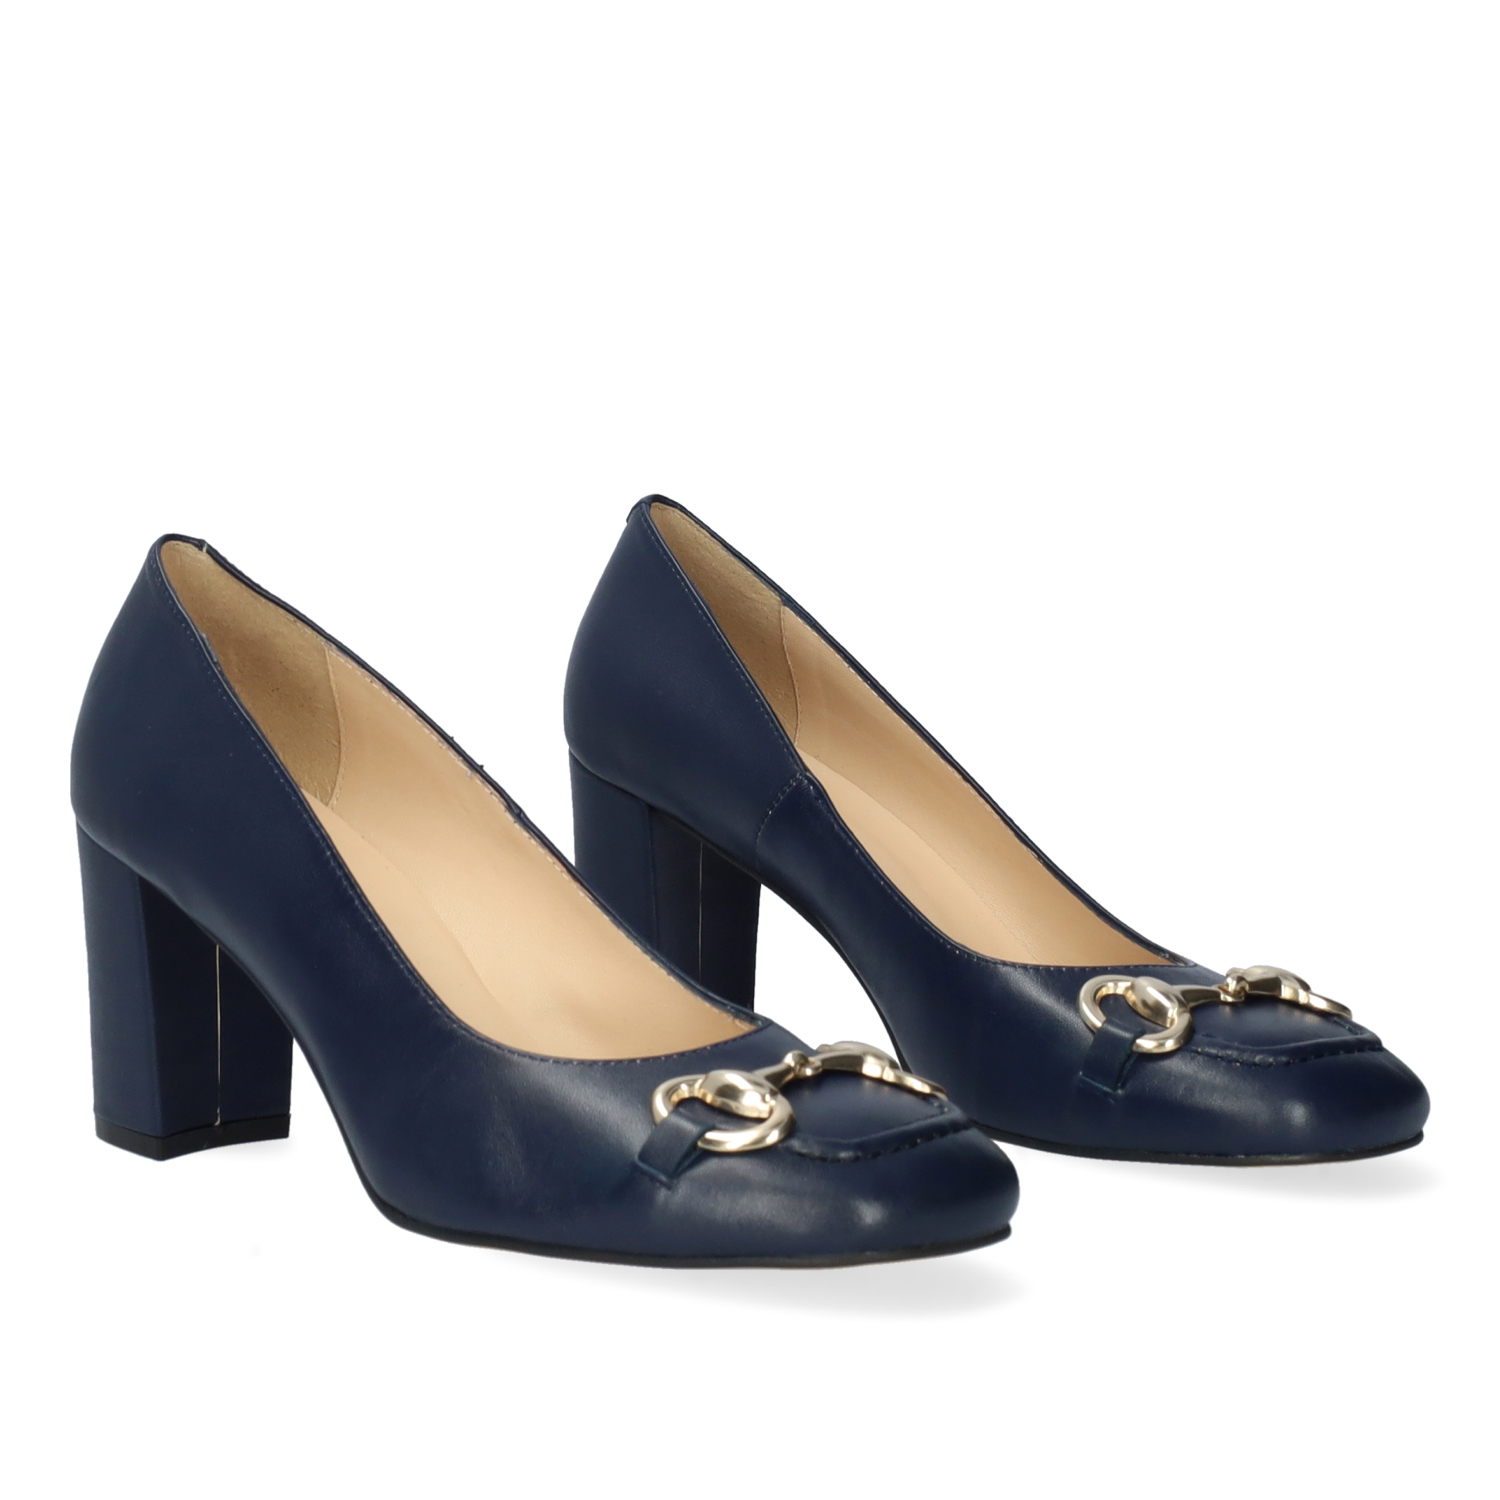 Vintage style heeled shoes in navy leather 